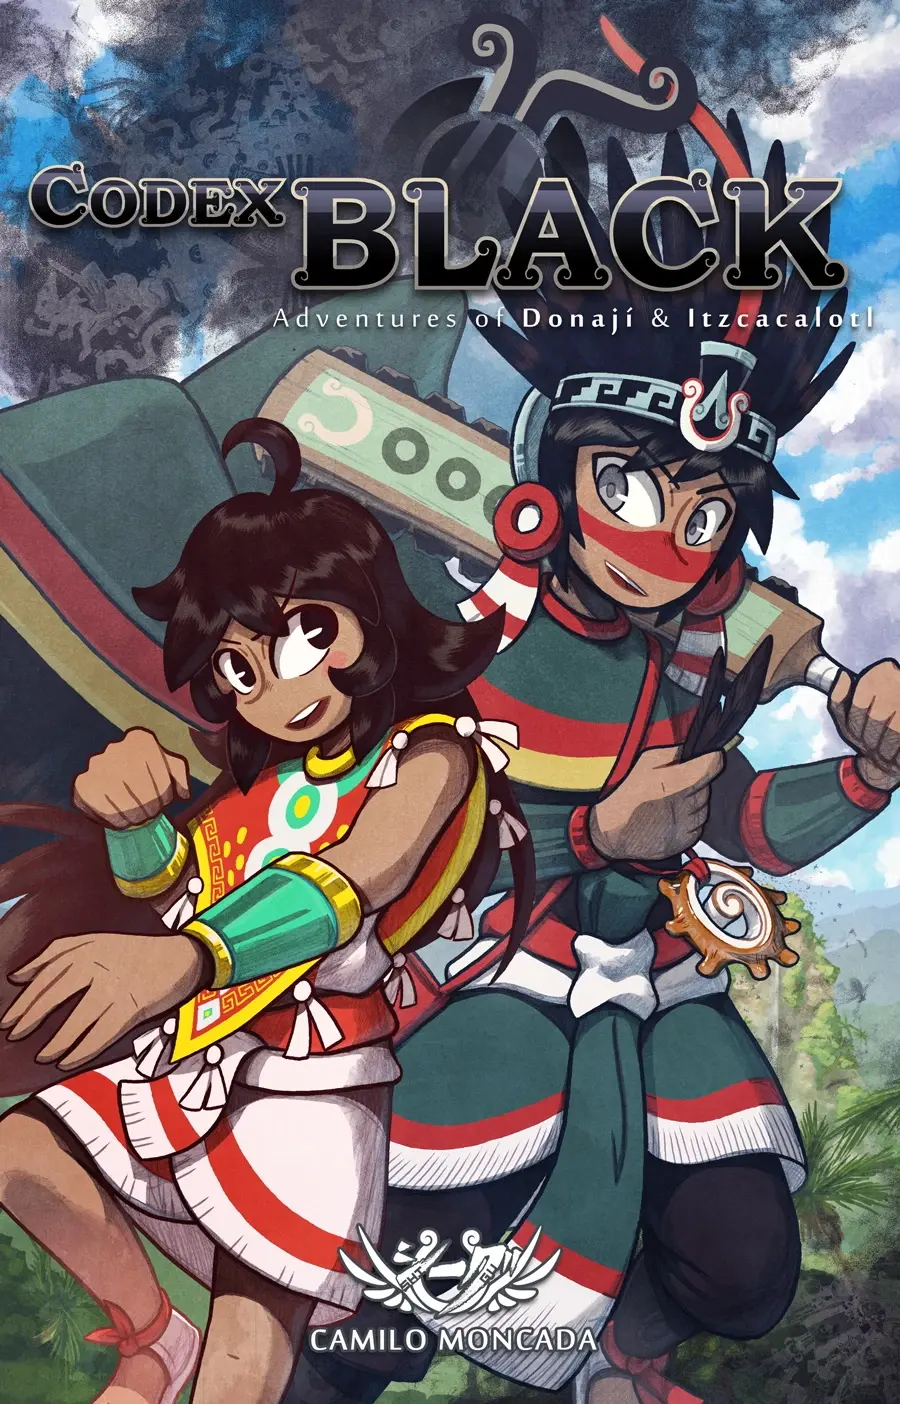 Cover featuring two characters smiling at each other, with one holding a weapon